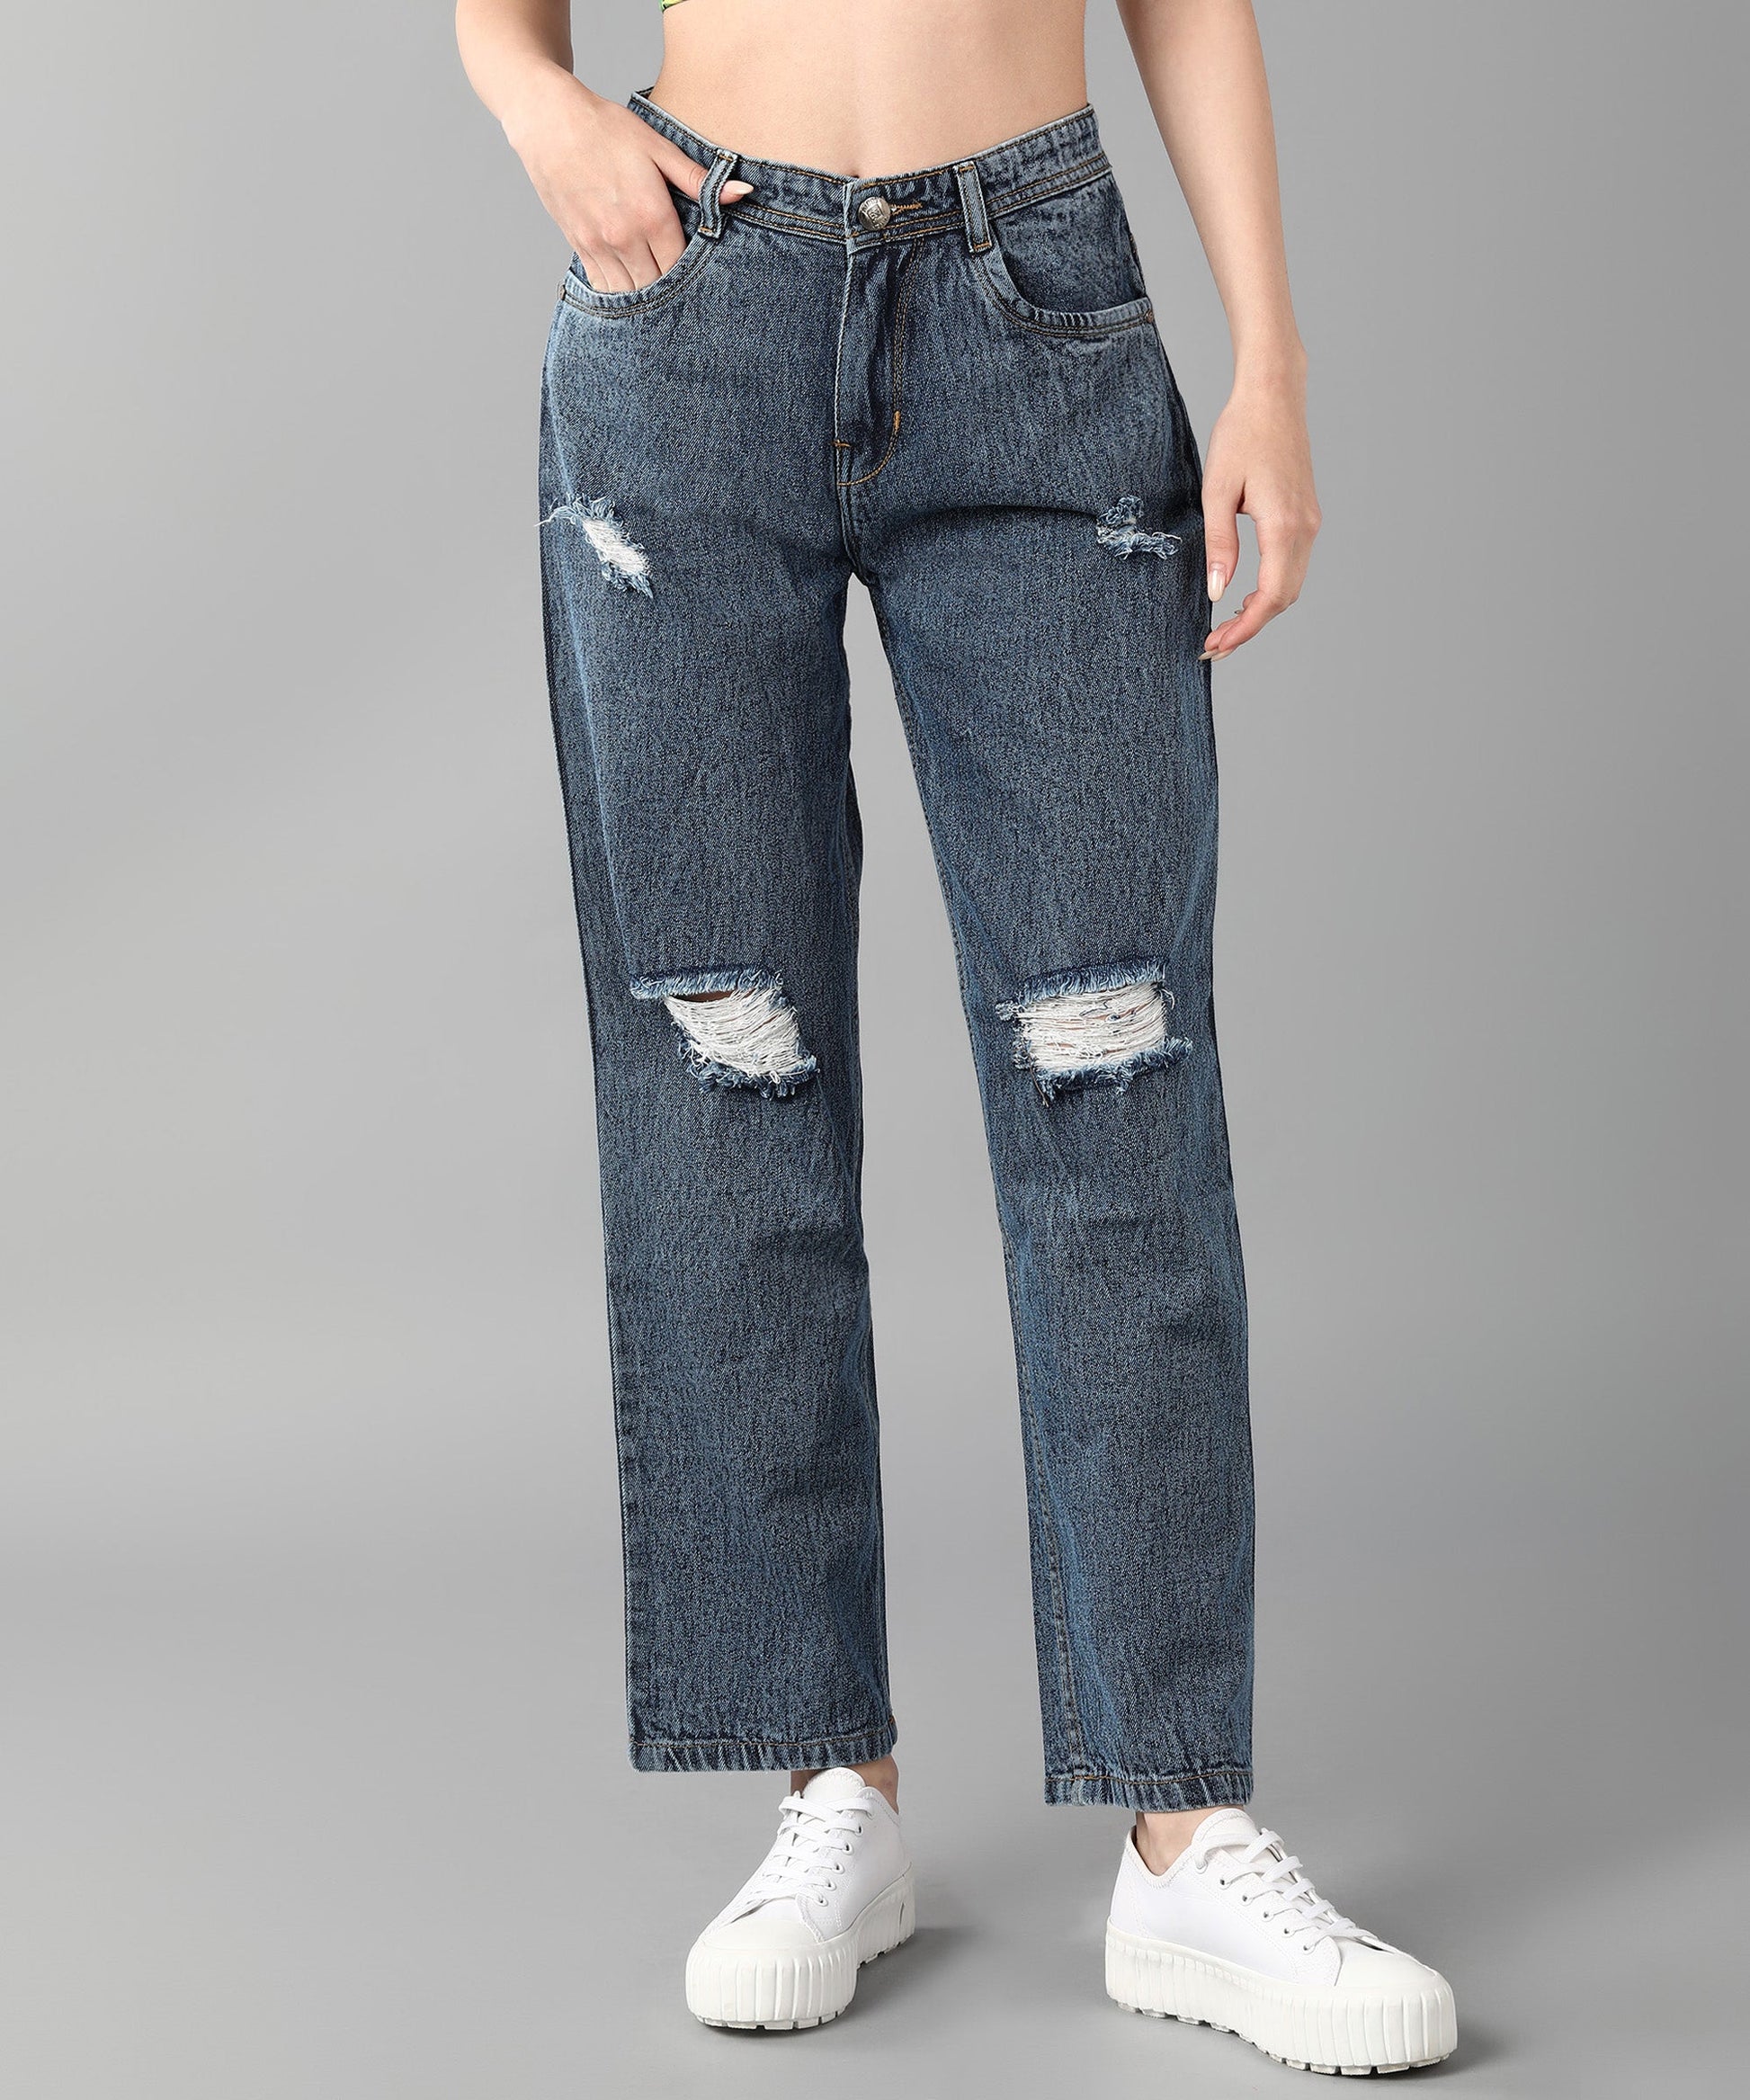 Relaxed Fit Distressed Sky Blue Jeans - NiftyJeans